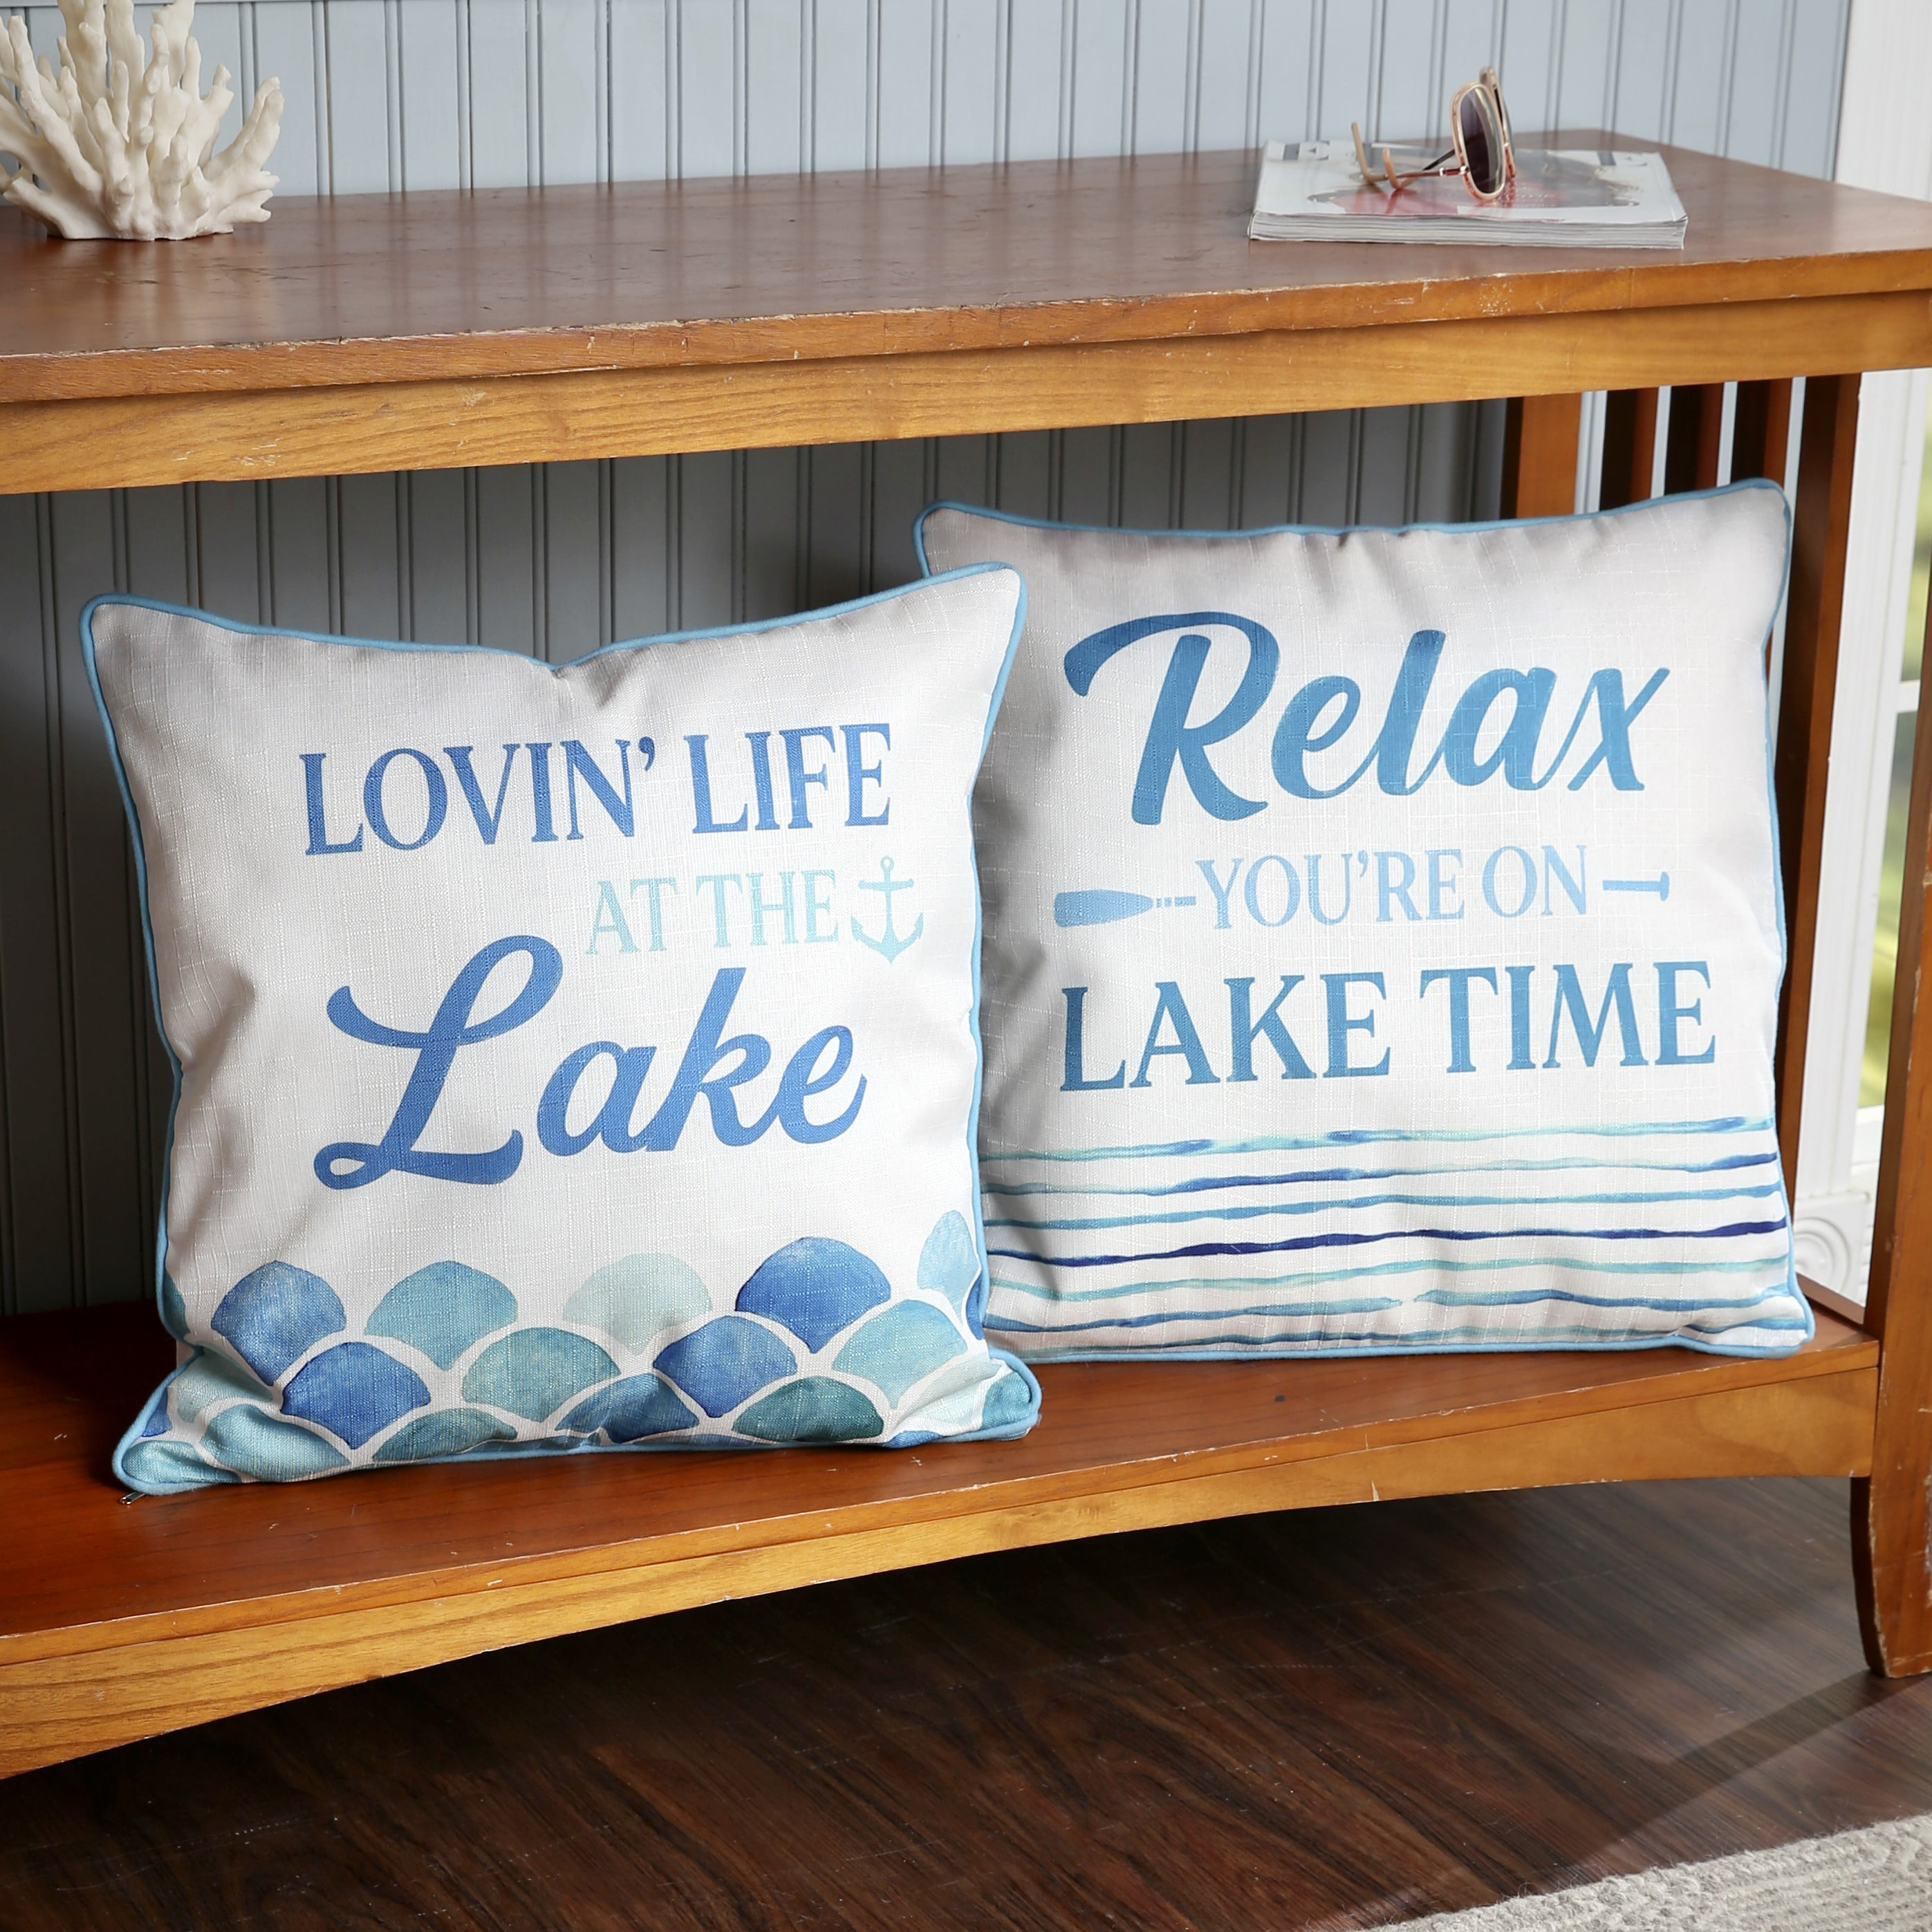 Life Is Better At The Lake Vintage White Pine Lake Throw Pillow 18x18 Multicolor